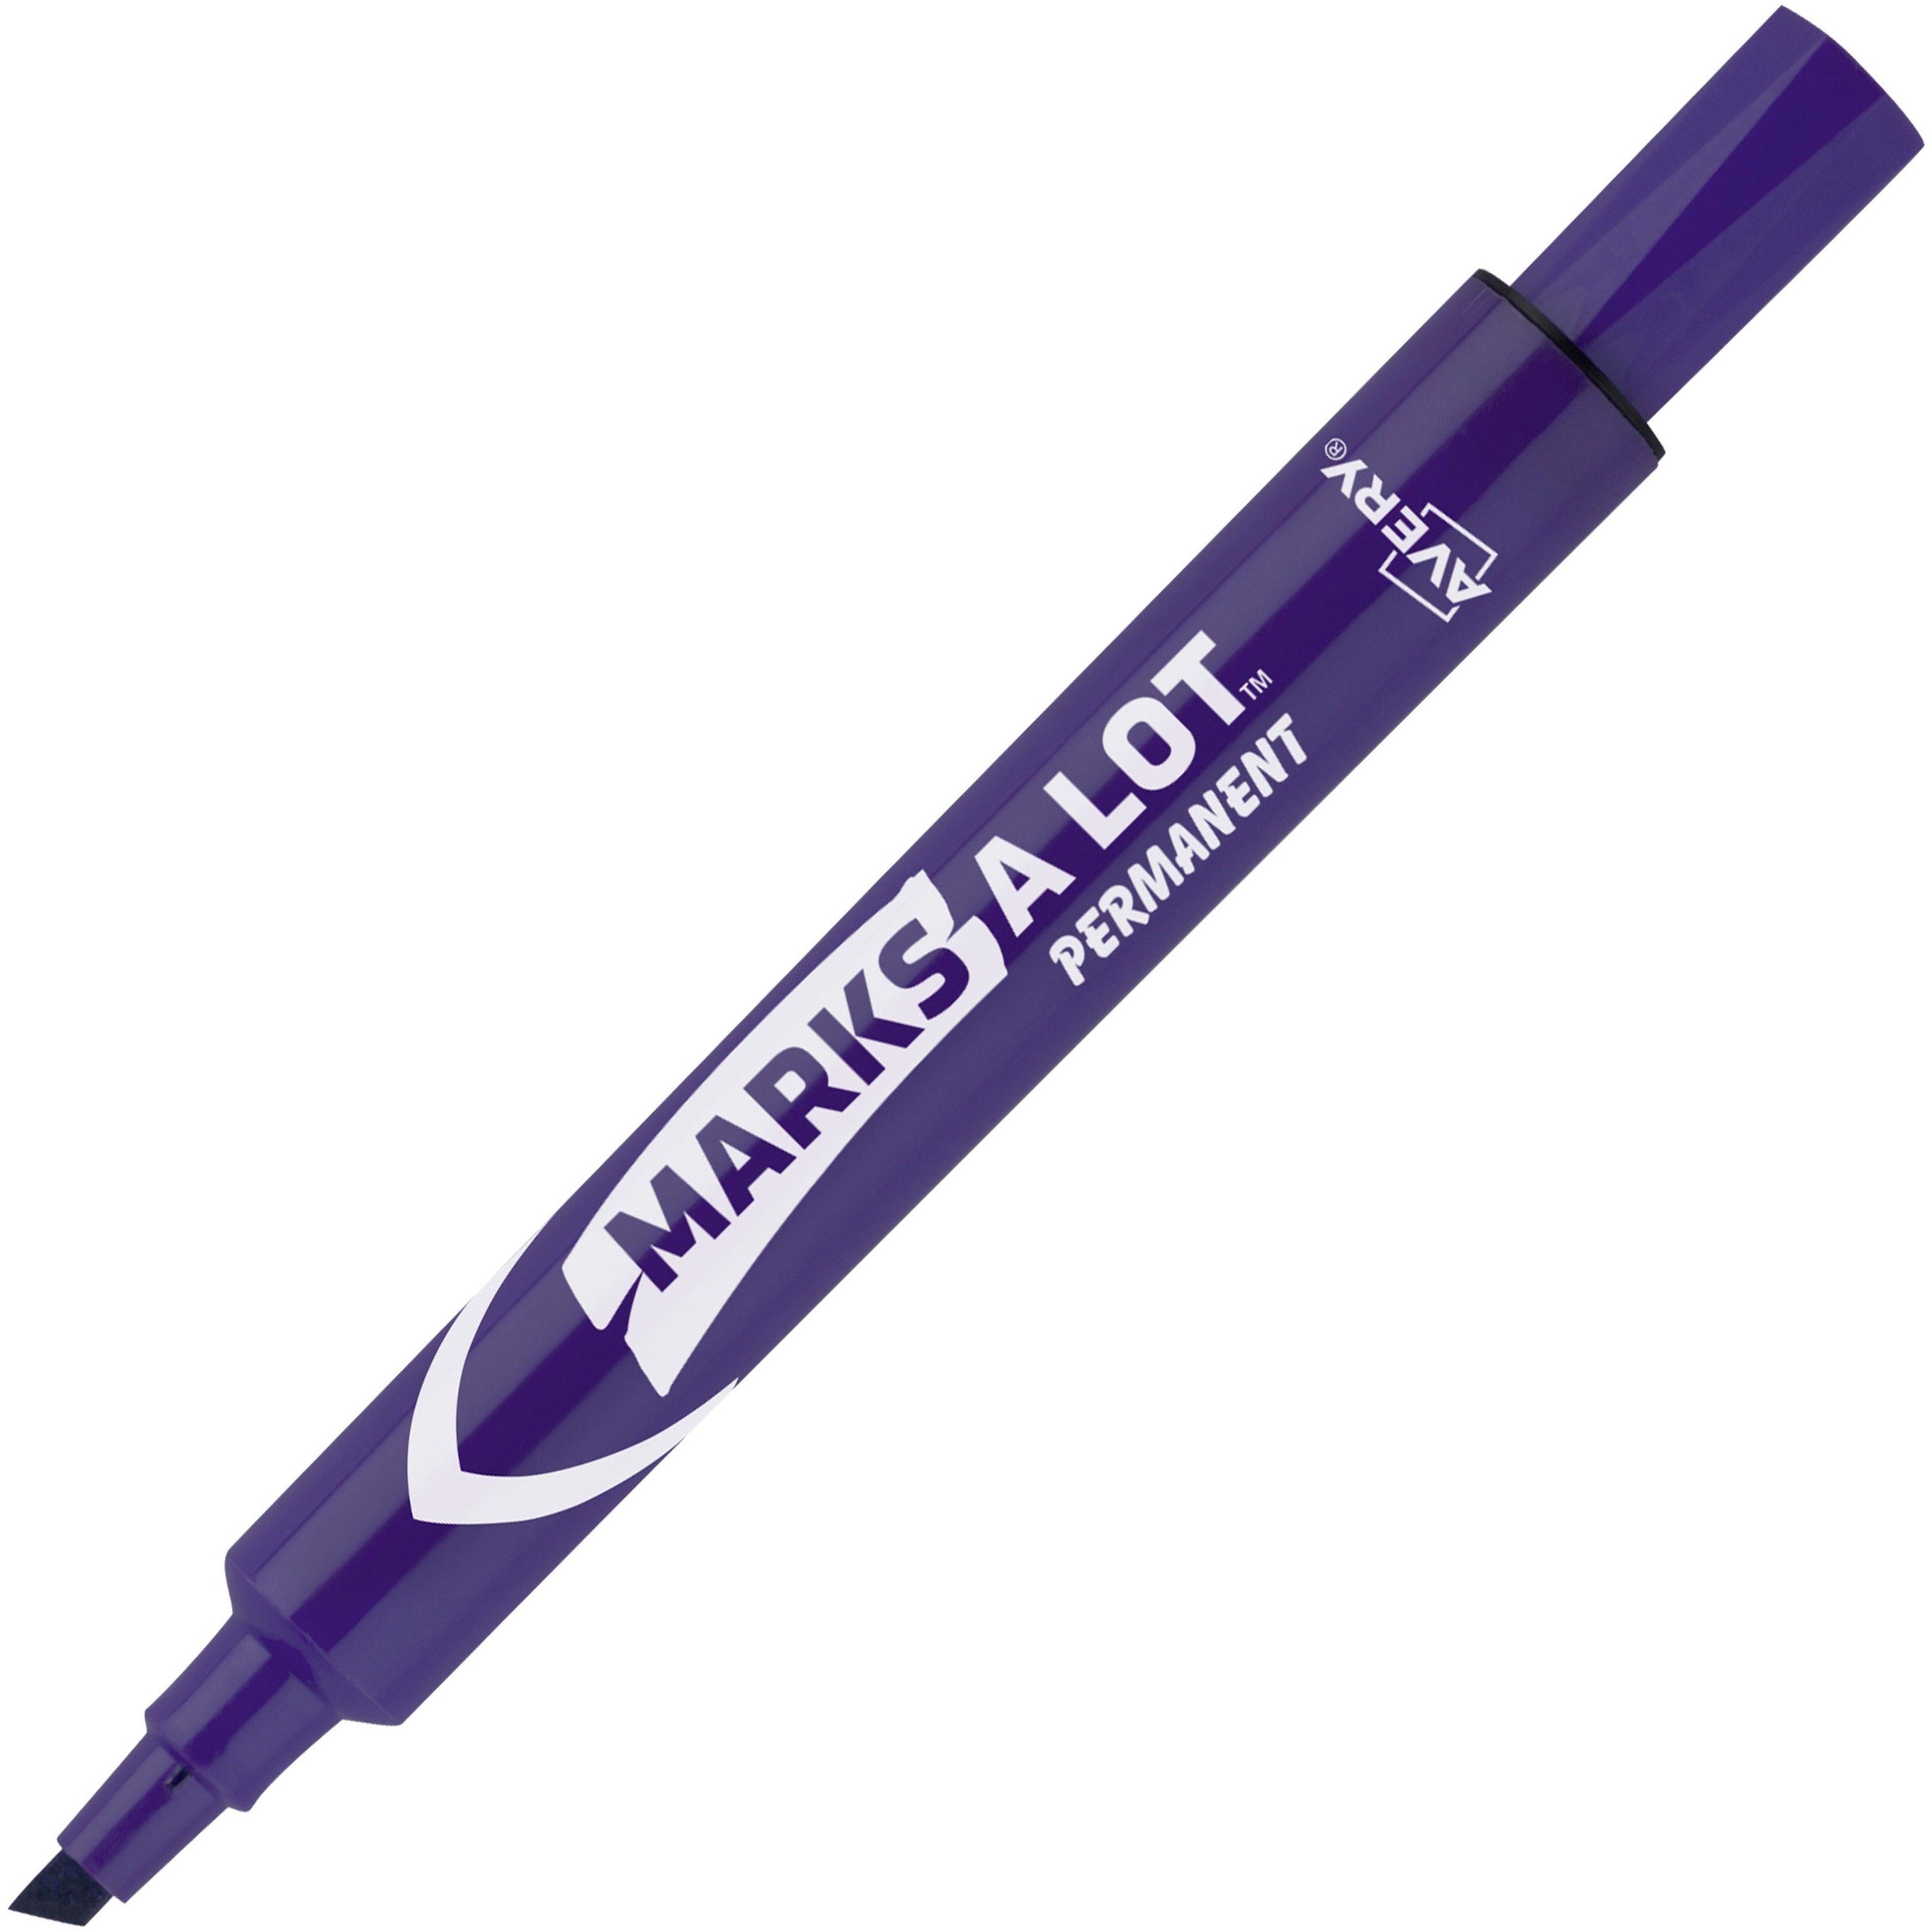 Avery Marks A Lot Permanent Markers, Large Desk-Style, 1 Purple Marker (8884) - image 1 of 7